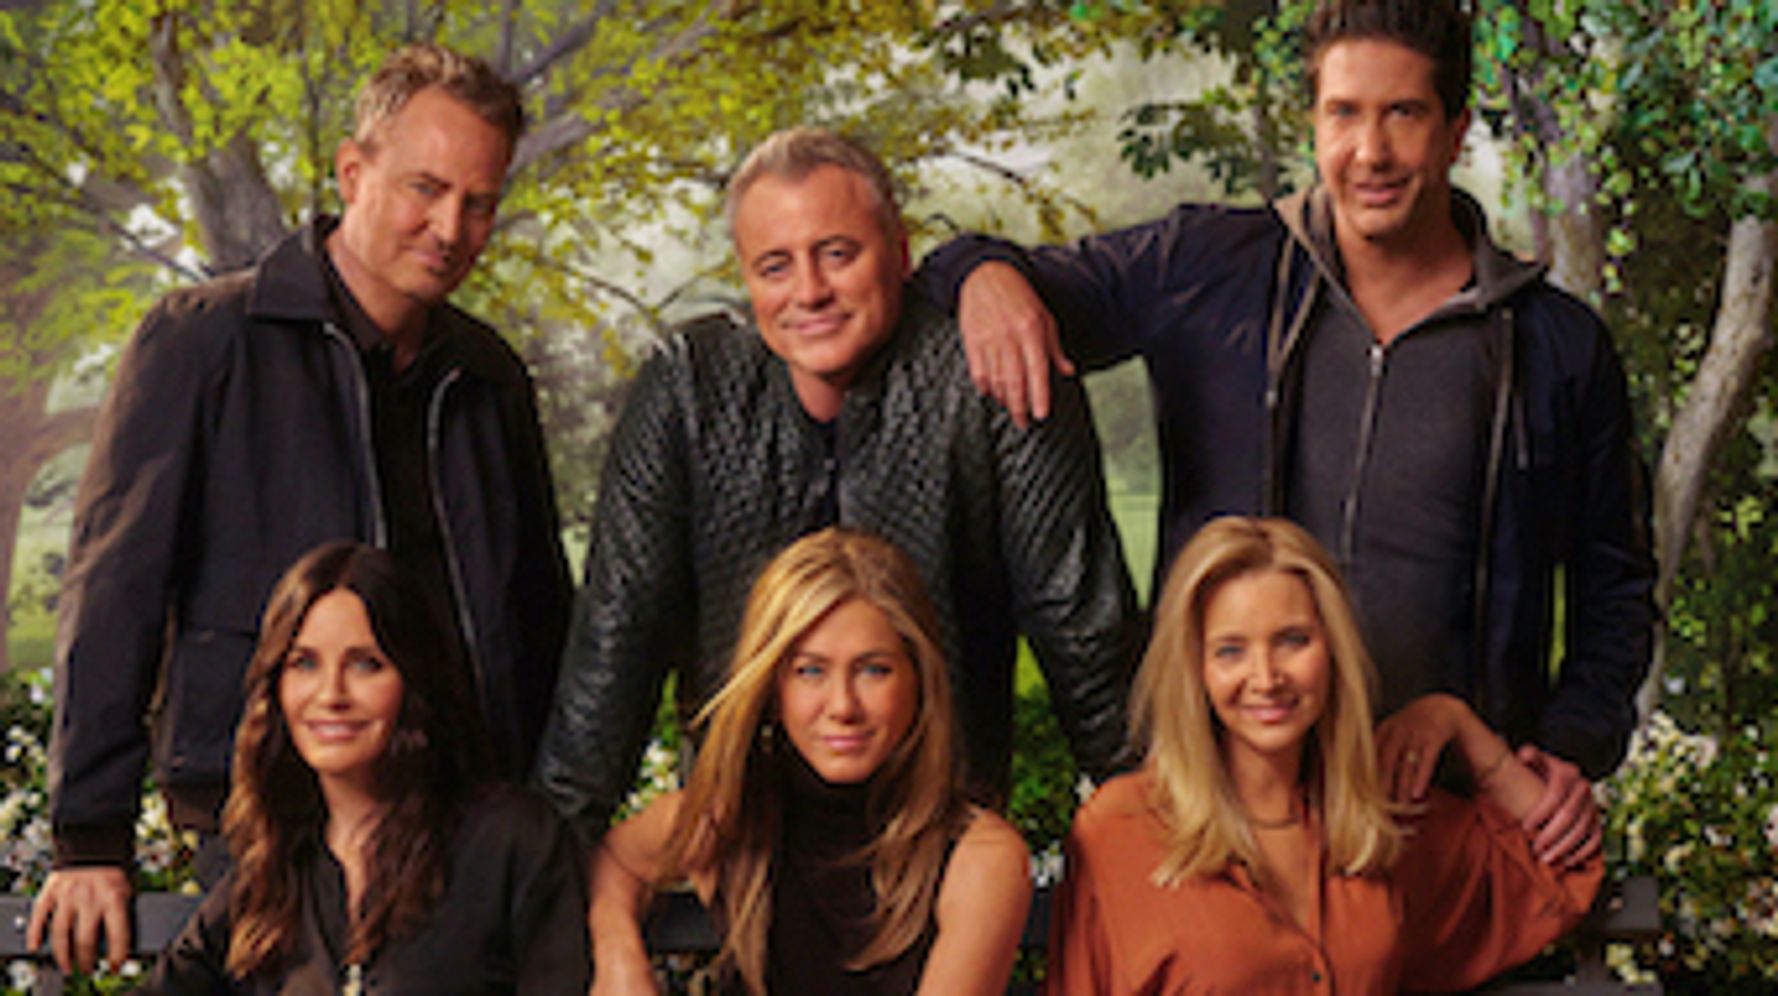 So No One Told You The 'Friends' Reunion Trailer Was Going To Make You Cry This Hard